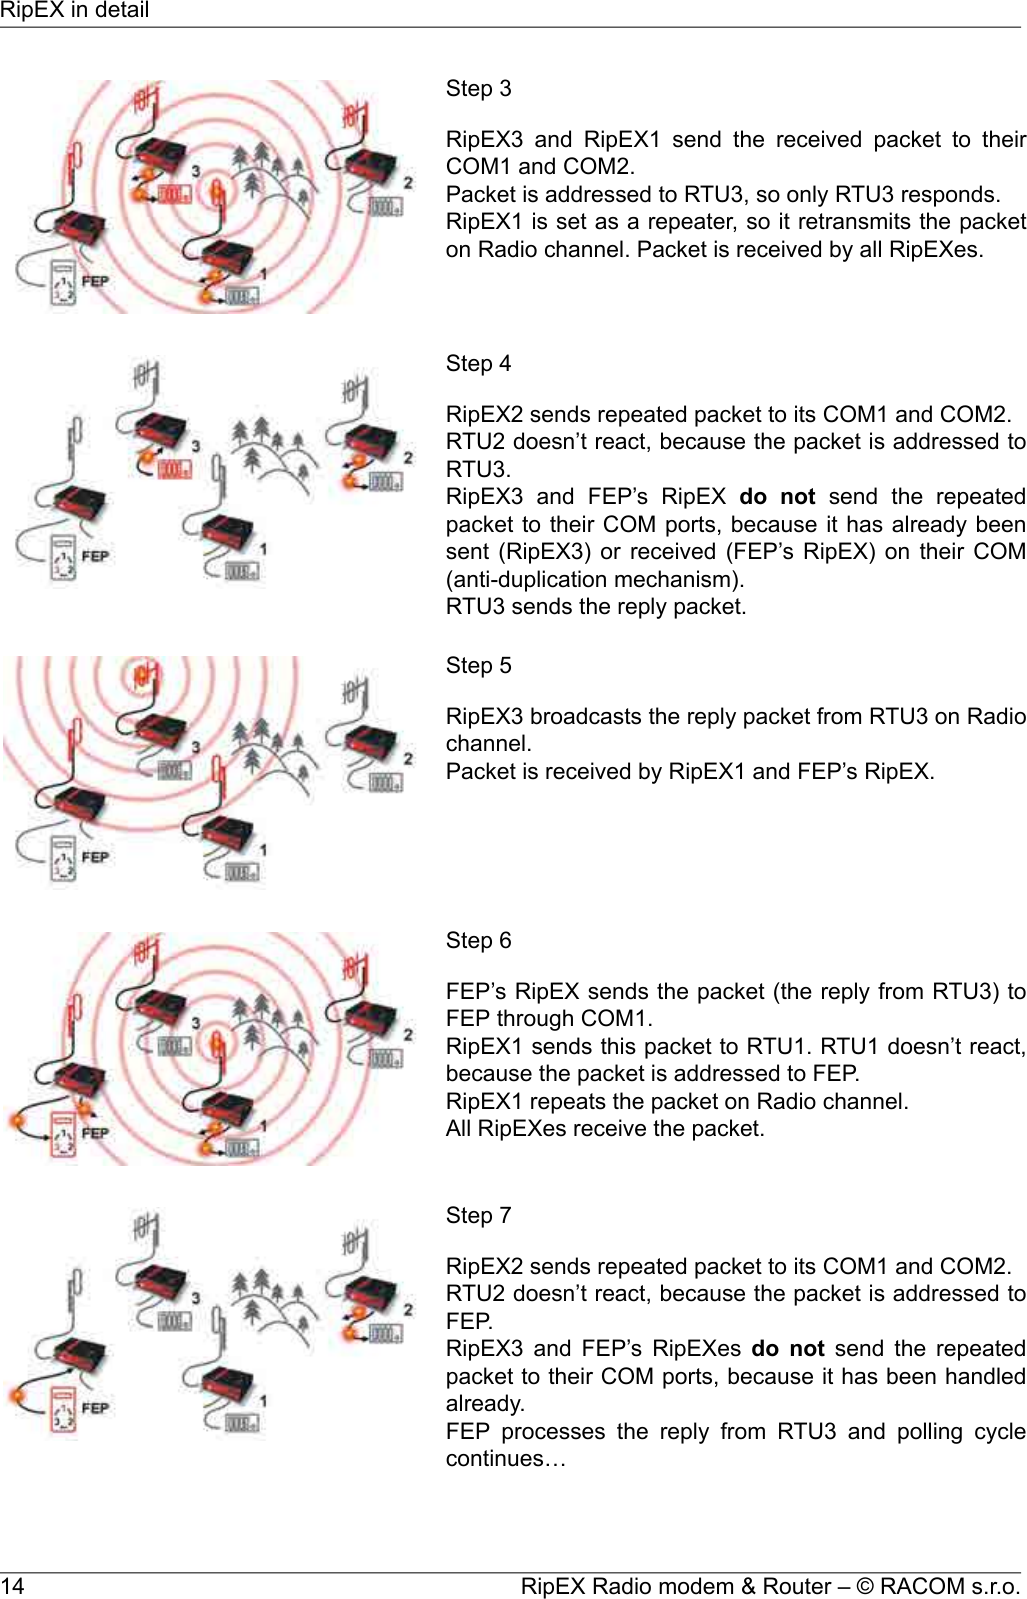 Step 3RipEX3 and RipEX1 send the received packet to theirCOM1 and COM2.Packet is addressed to RTU3, so only RTU3 responds.RipEX1 is set as a repeater, so it retransmits the packeton Radio channel. Packet is received by all RipEXes.Step 4RipEX2 sends repeated packet to its COM1 and COM2.RTU2 doesn’t react, because the packet is addressed toRTU3.RipEX3 and FEP’s RipEX do not send the repeatedpacket to their COM ports, because it has already beensent (RipEX3) or received (FEP’s RipEX) on their COM(anti-duplication mechanism).RTU3 sends the reply packet.Step 5RipEX3 broadcasts the reply packet from RTU3 on Radiochannel.Packet is received by RipEX1 and FEP’s RipEX.Step 6FEP’s RipEX sends the packet (the reply from RTU3) toFEP through COM1.RipEX1 sends this packet to RTU1. RTU1 doesn’t react,because the packet is addressed to FEP.RipEX1 repeats the packet on Radio channel.All RipEXes receive the packet.Step 7RipEX2 sends repeated packet to its COM1 and COM2.RTU2 doesn’t react, because the packet is addressed toFEP.RipEX3 and FEP’s RipEXes do not send the repeatedpacket to their COM ports, because it has been handledalready.FEP processes the reply from RTU3 and polling cyclecontinues…RipEX Radio modem &amp; Router – © RACOM s.r.o.14RipEX in detail